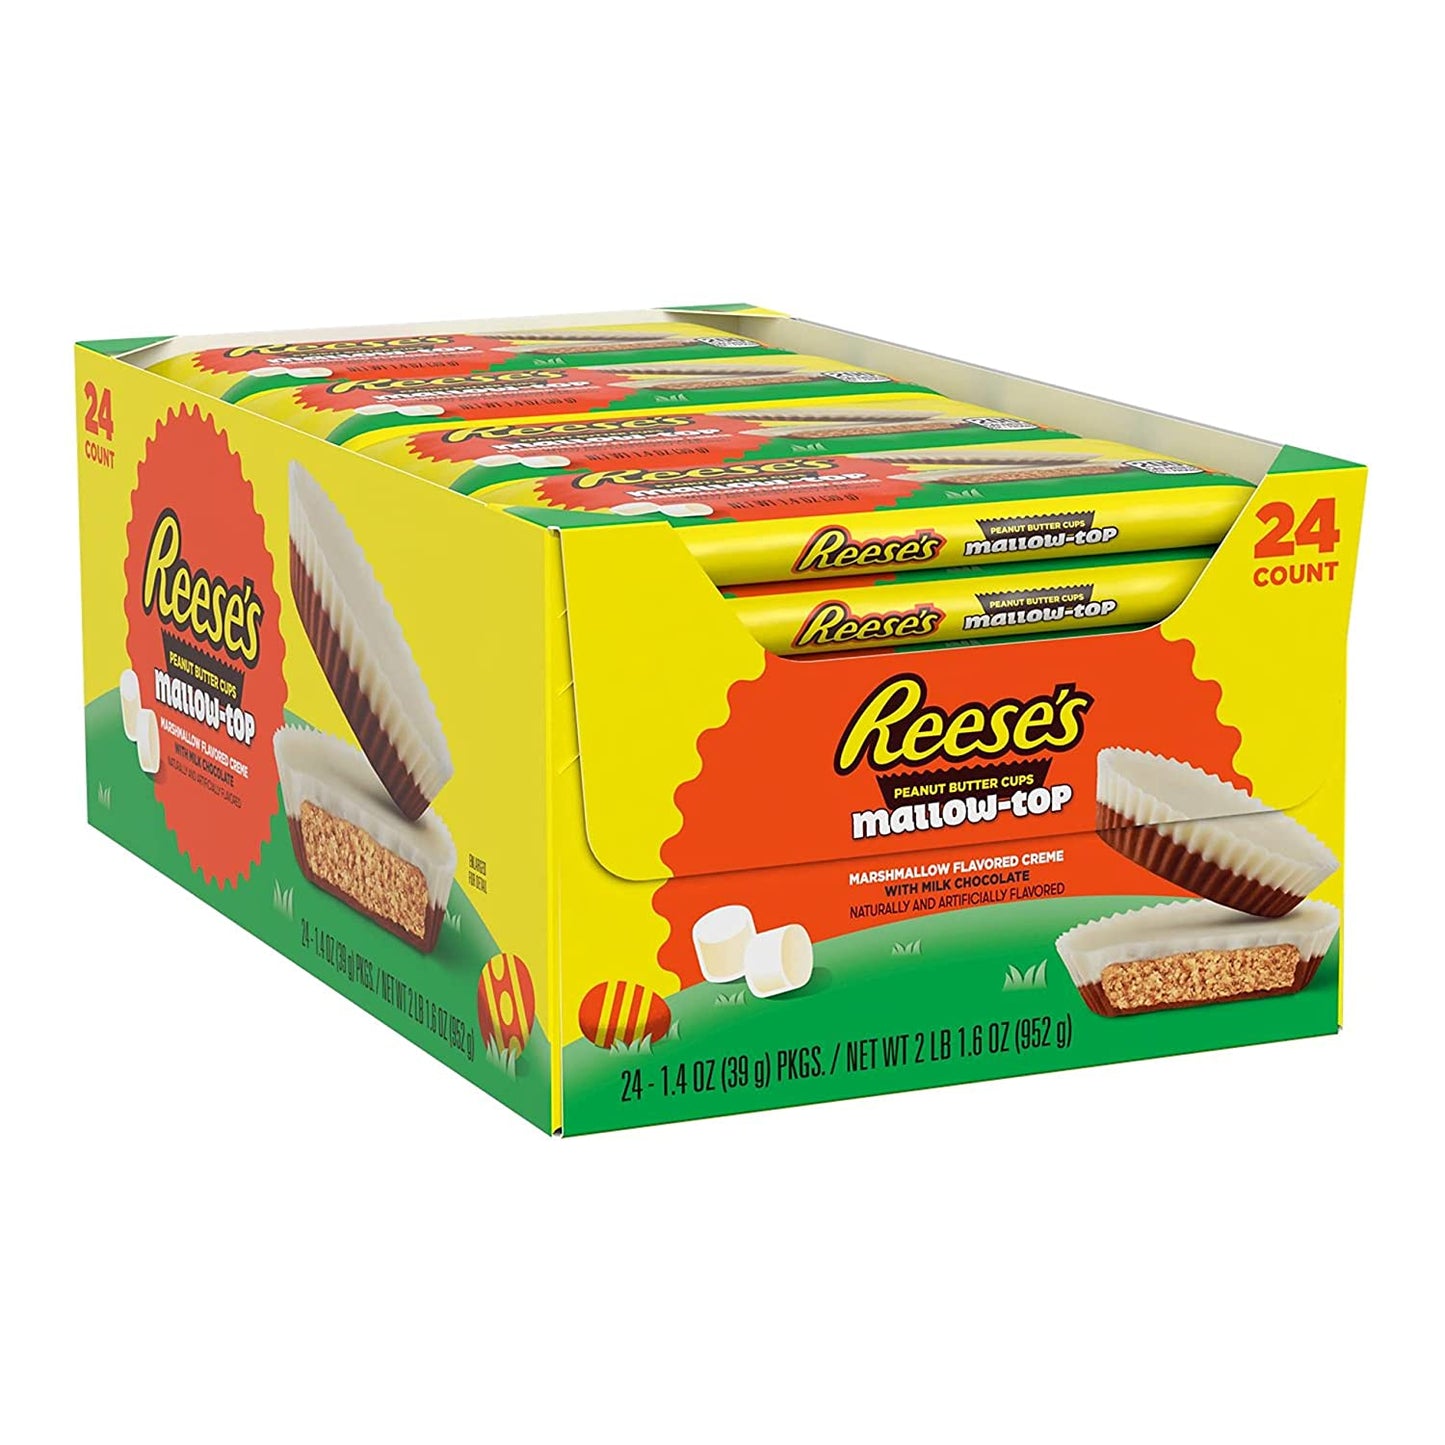 REESE'S Mallow-Top Marshmallow Creme Milk Chocolate Peanut Butter Cups Candy, Easter,24 Count Limited Edition - LOWEST PRICE IN CANADA